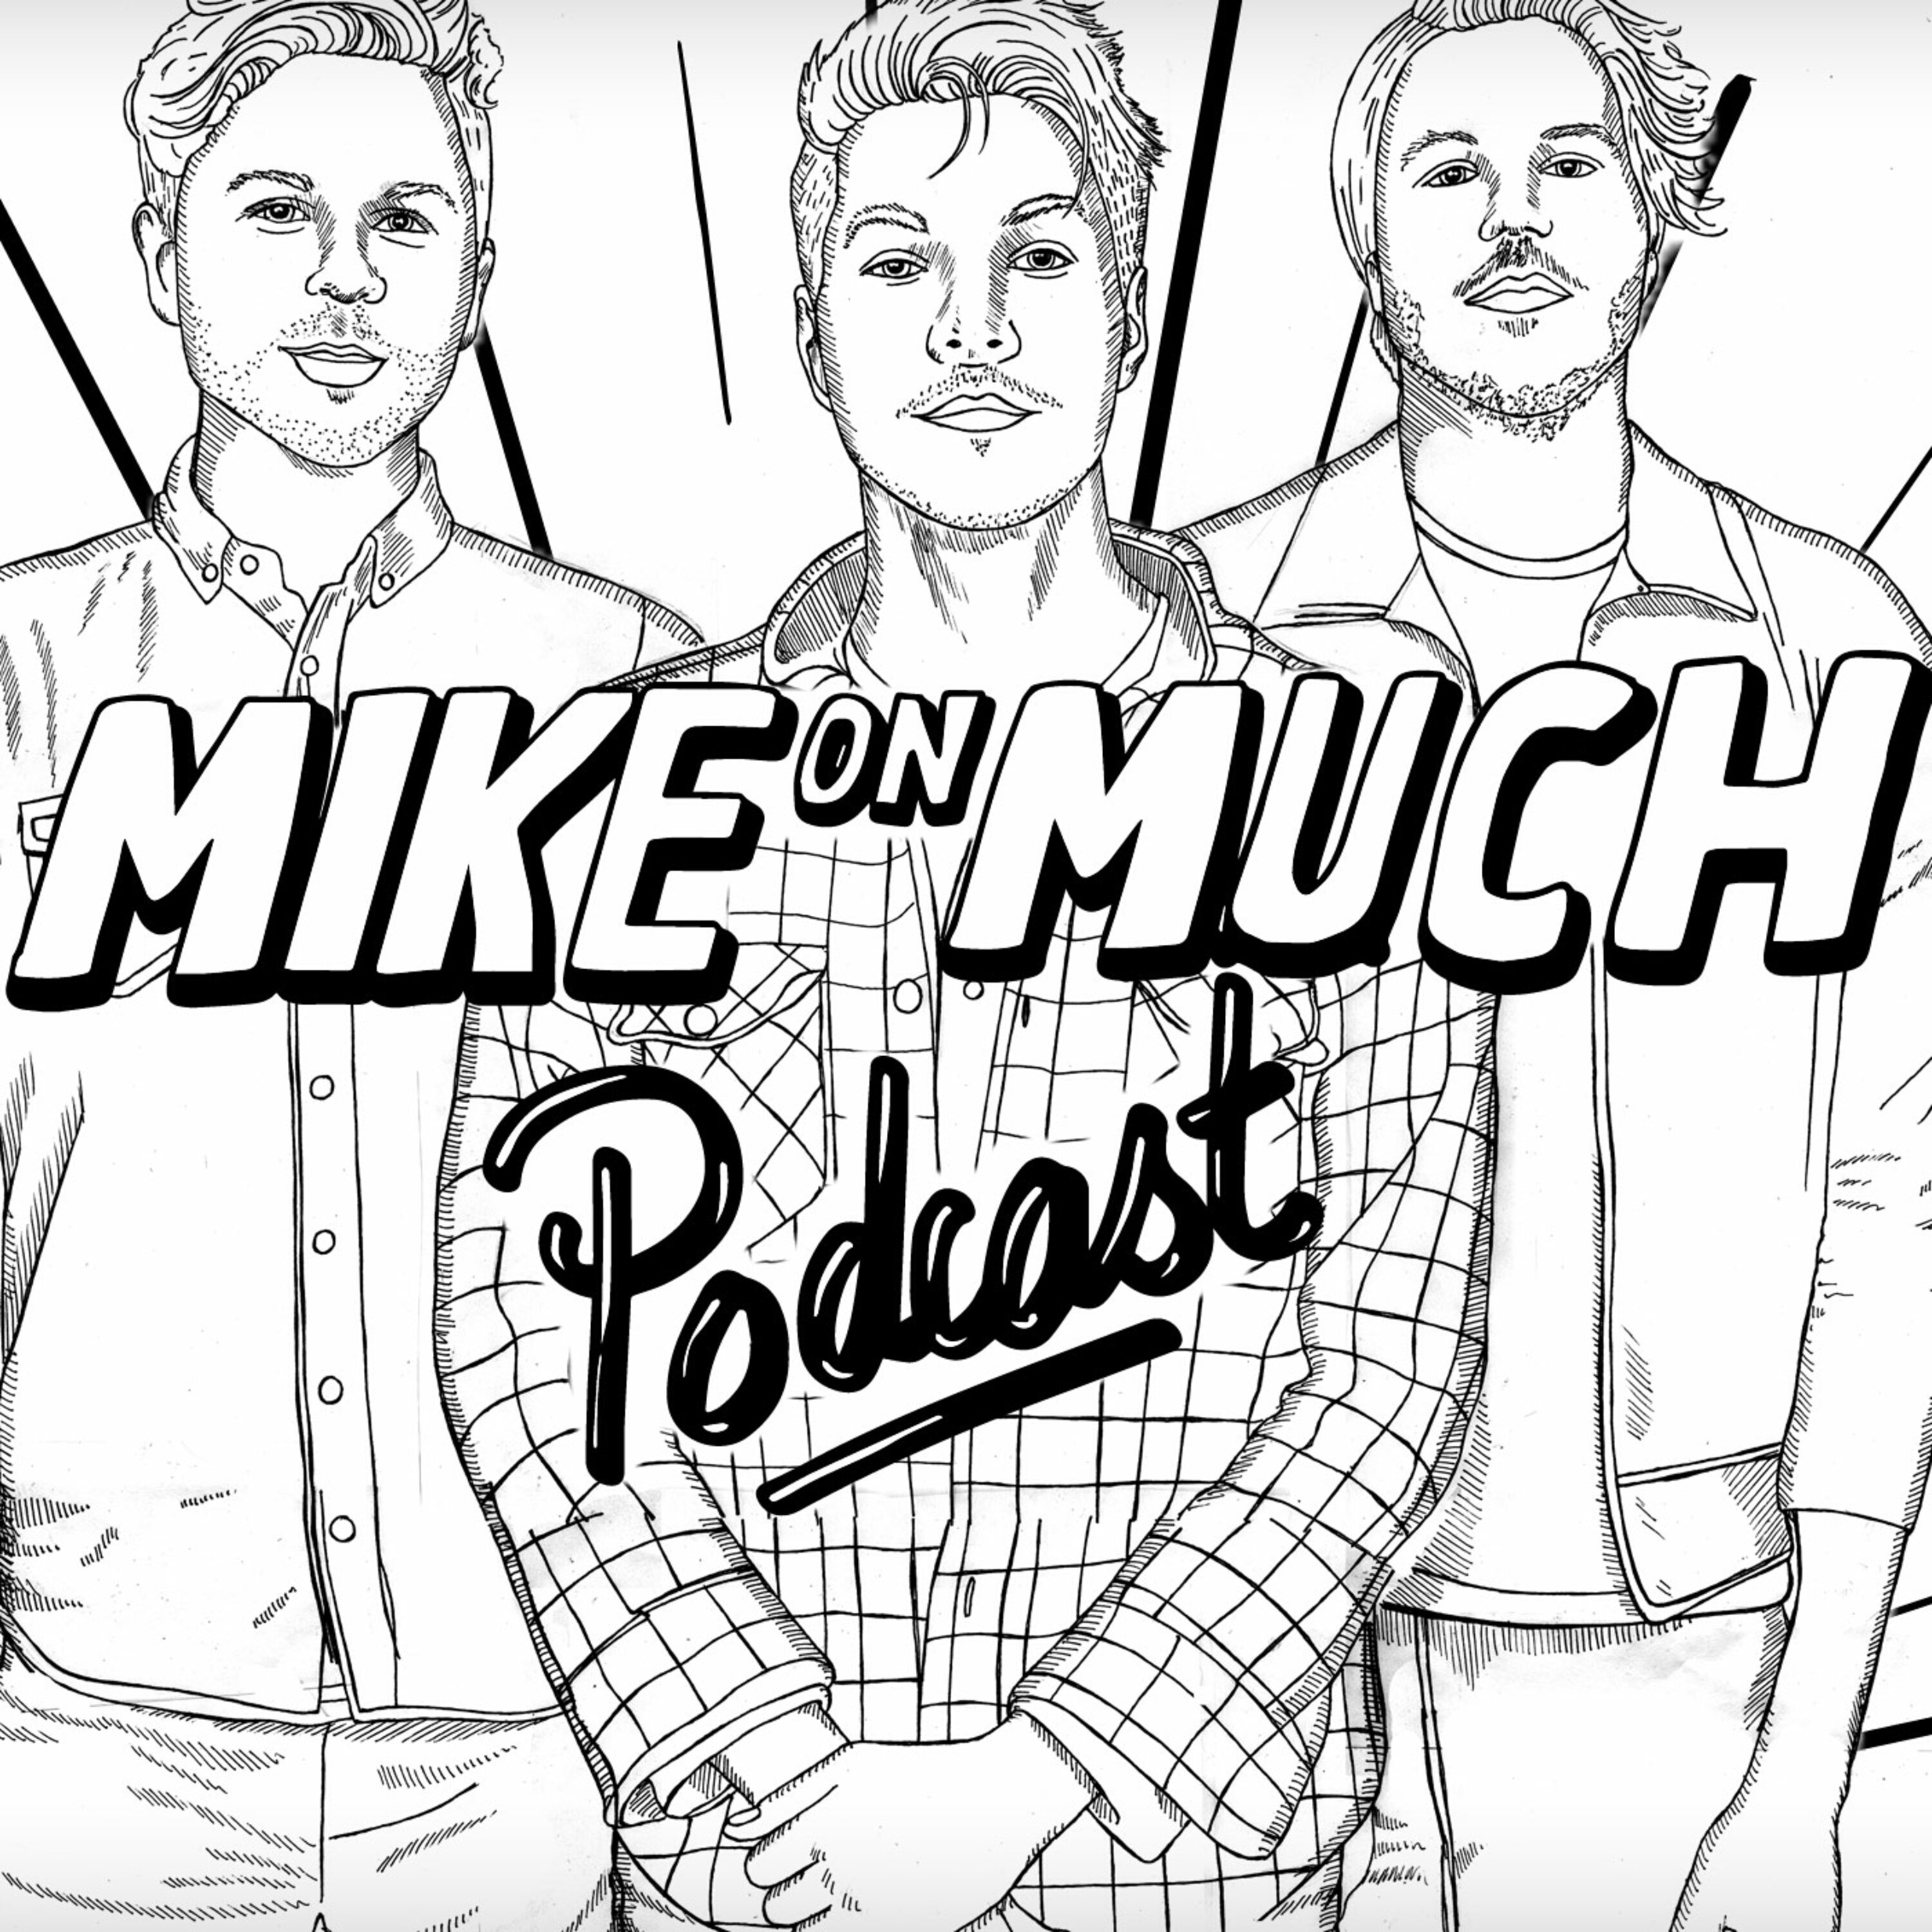 Season 1 Mike On Much: “It’s Not For Me, AND I Dismiss It!”